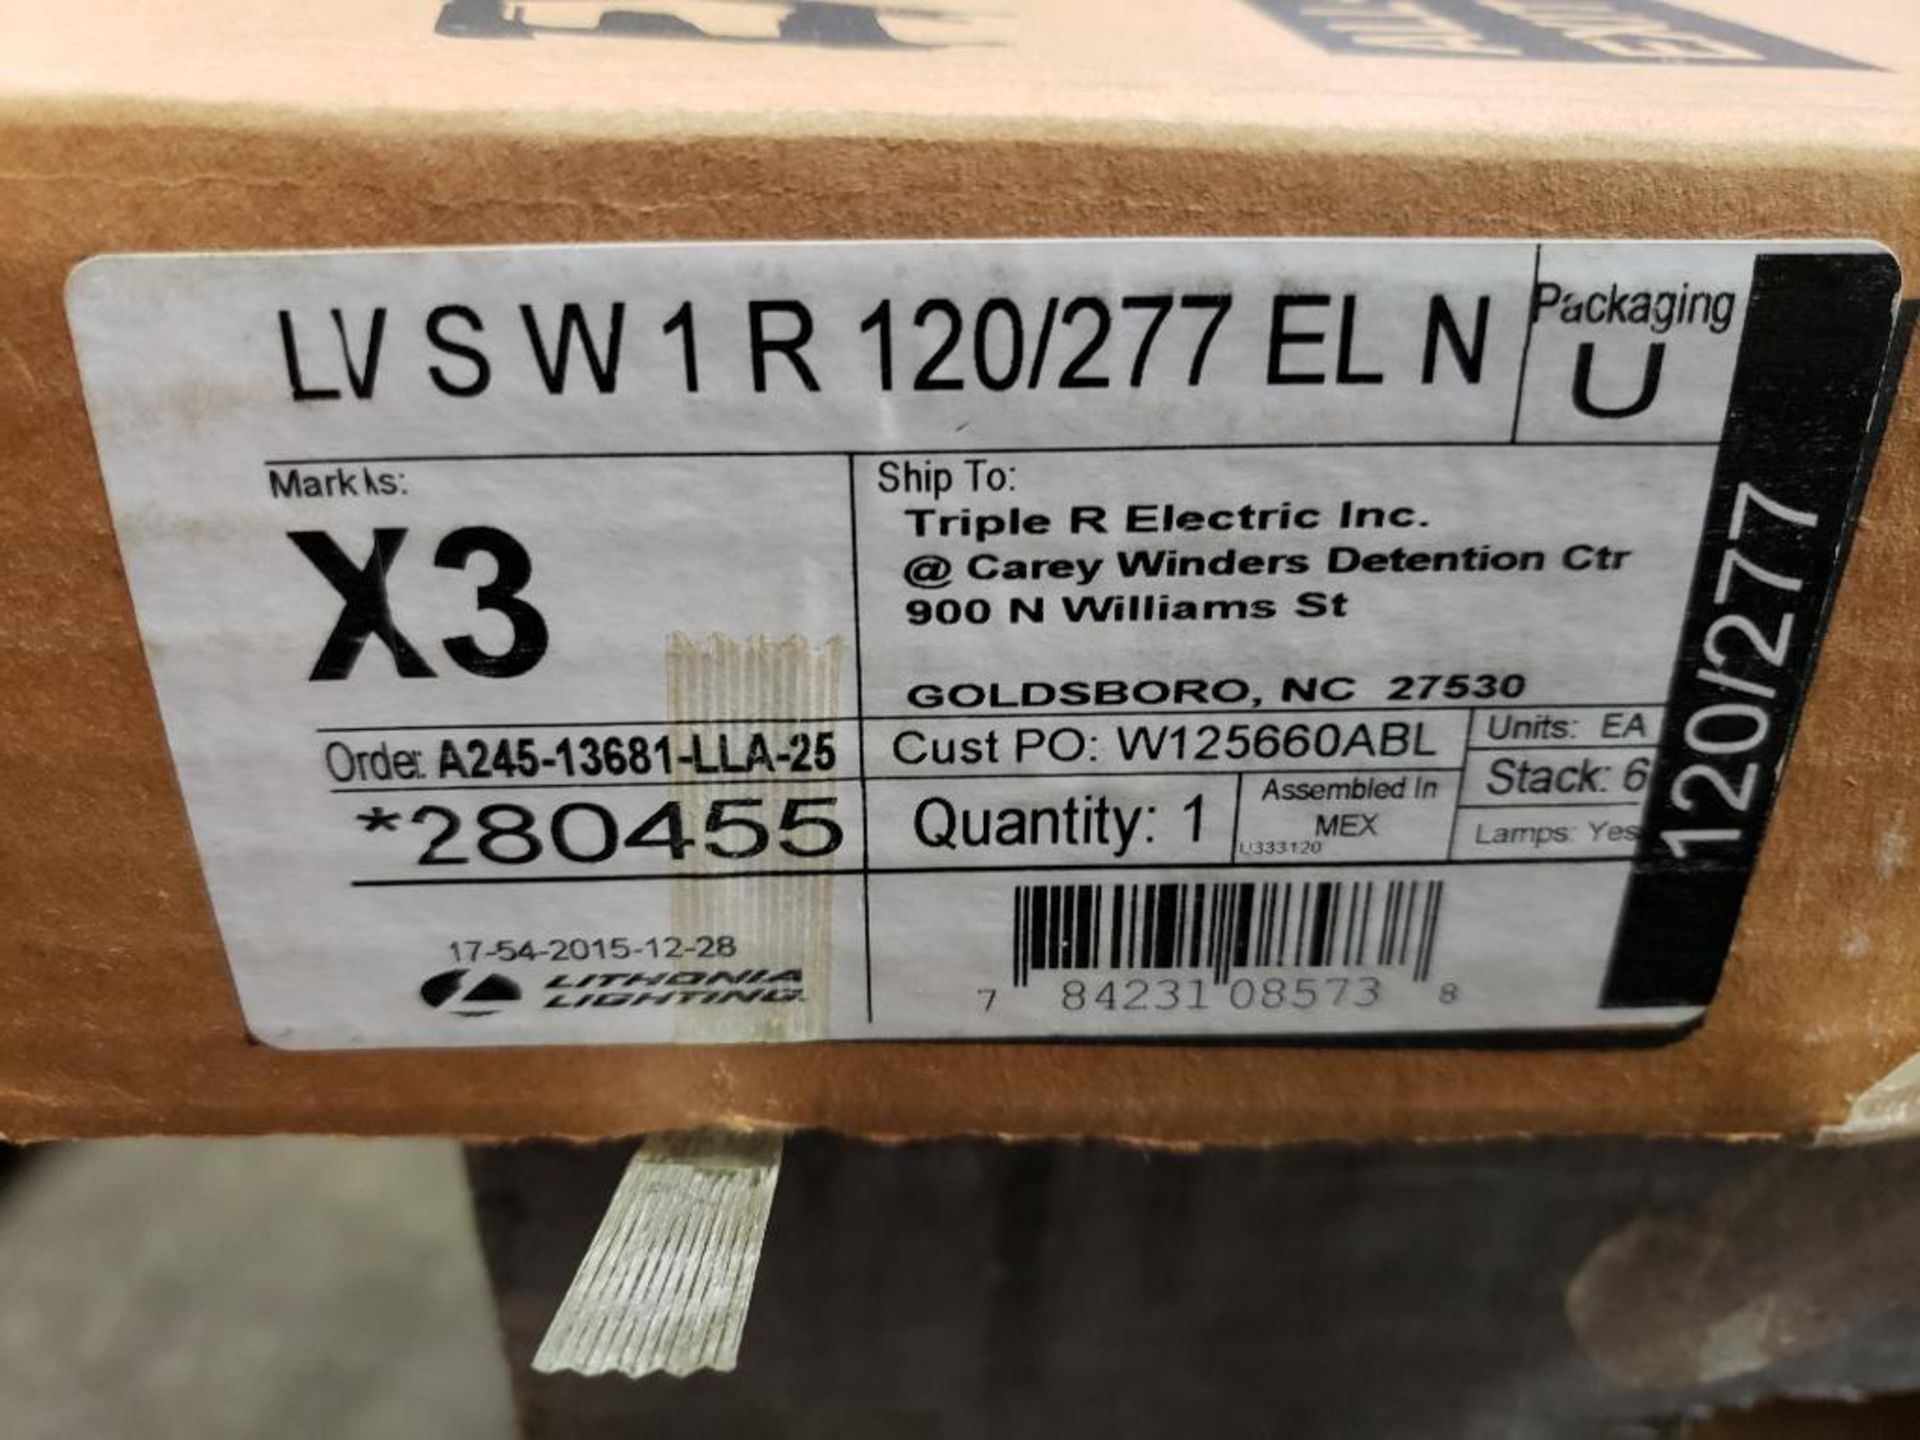 Lithonia Lighting LVSW1R 120/277 Extreme all conditions exit sign. New in box. - Image 2 of 2